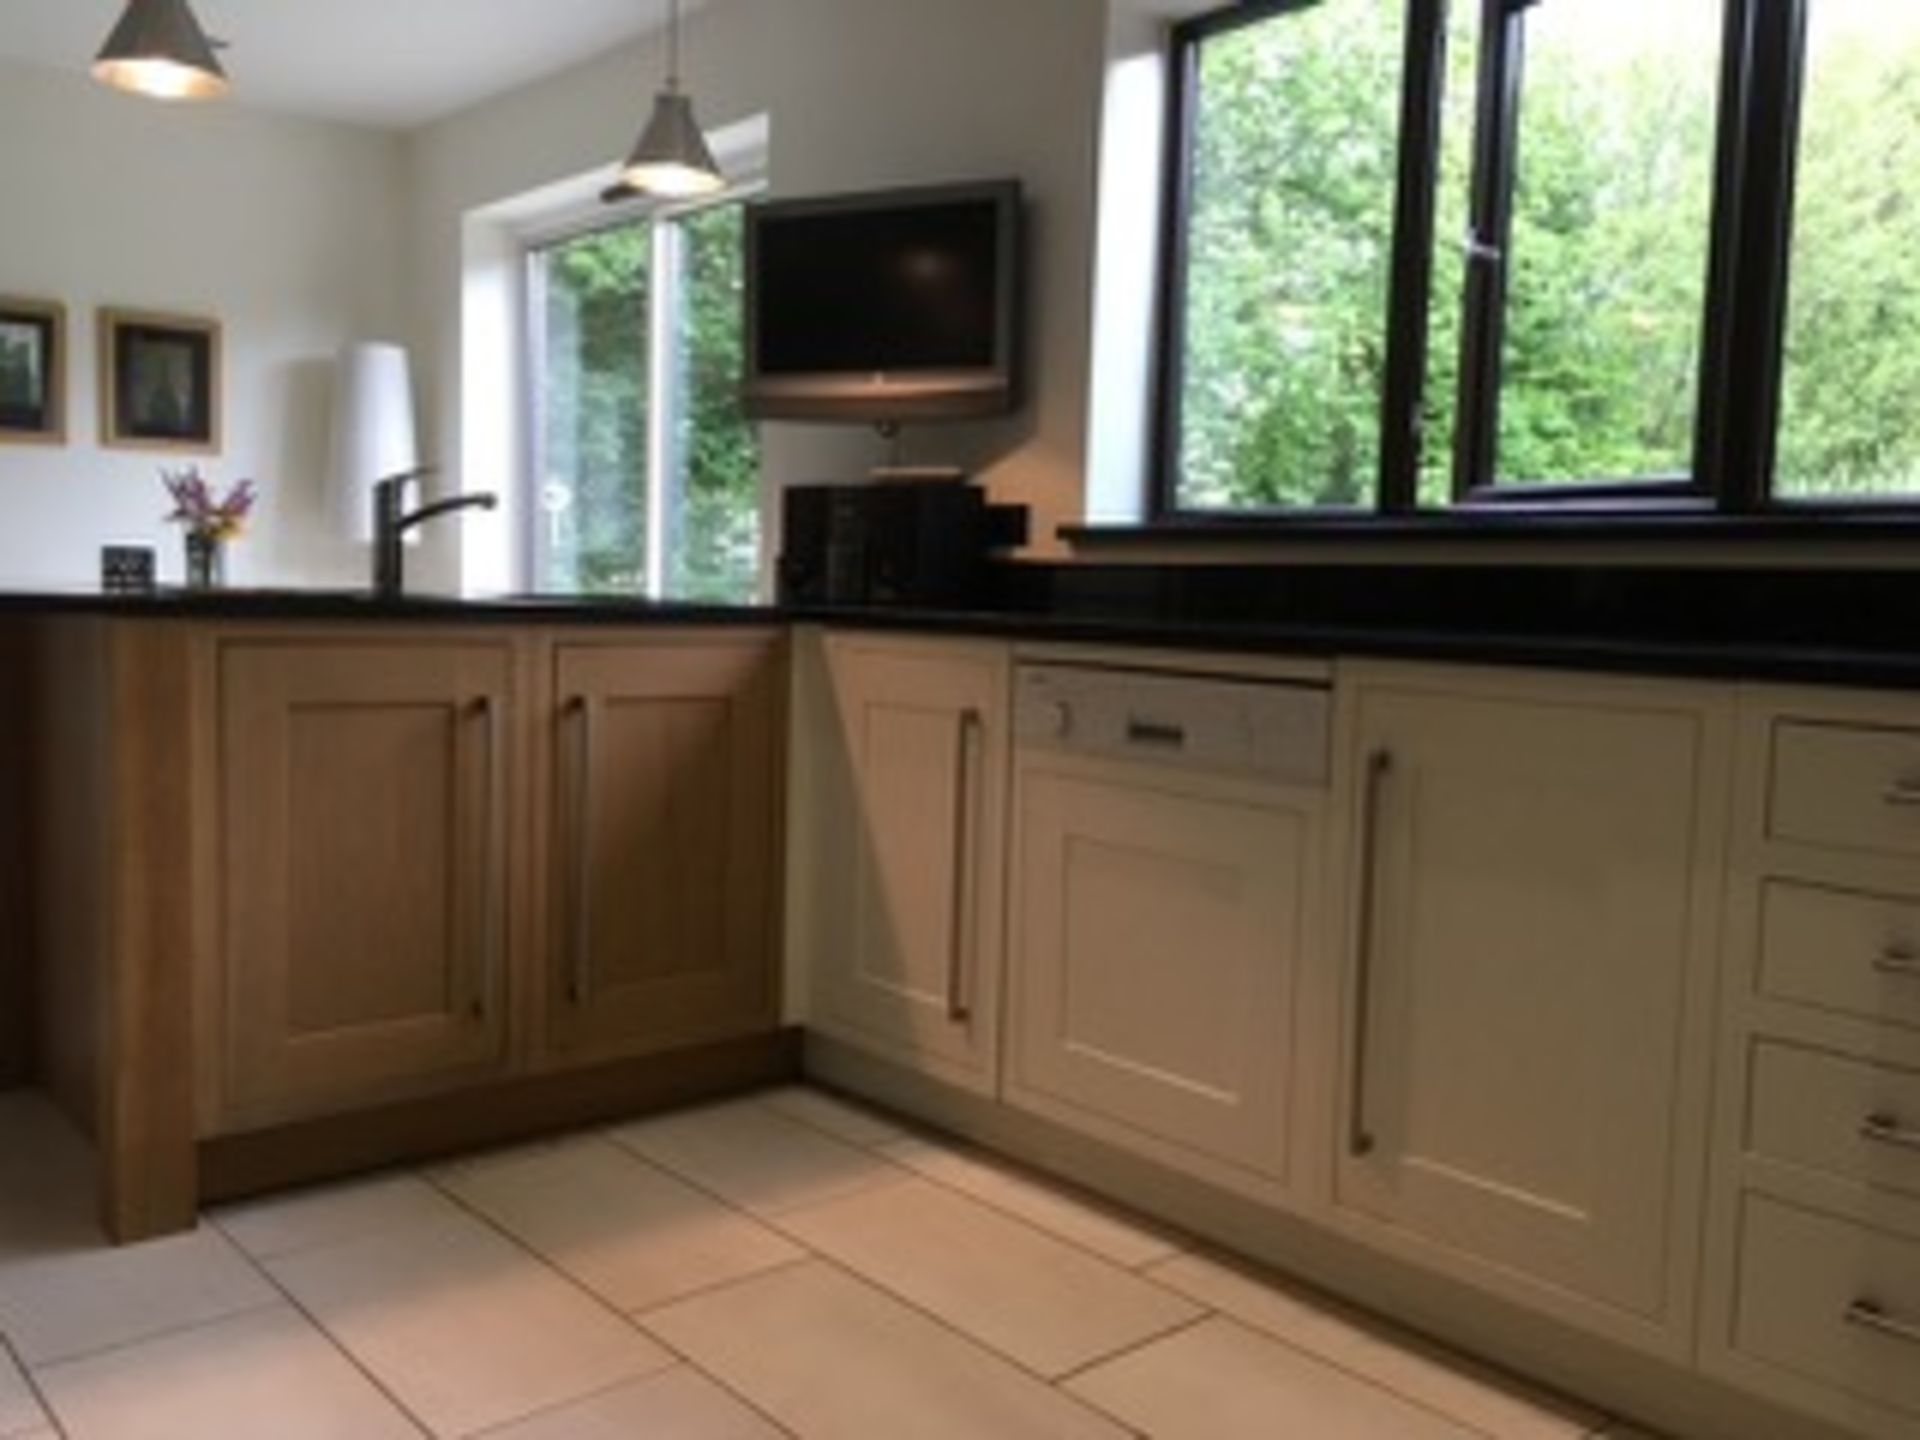 1 x Bespoke Solid Wood Fitted Kitchen With Granite Worktops - Pre-owned In Good Condtion - CL172 - - Image 10 of 22